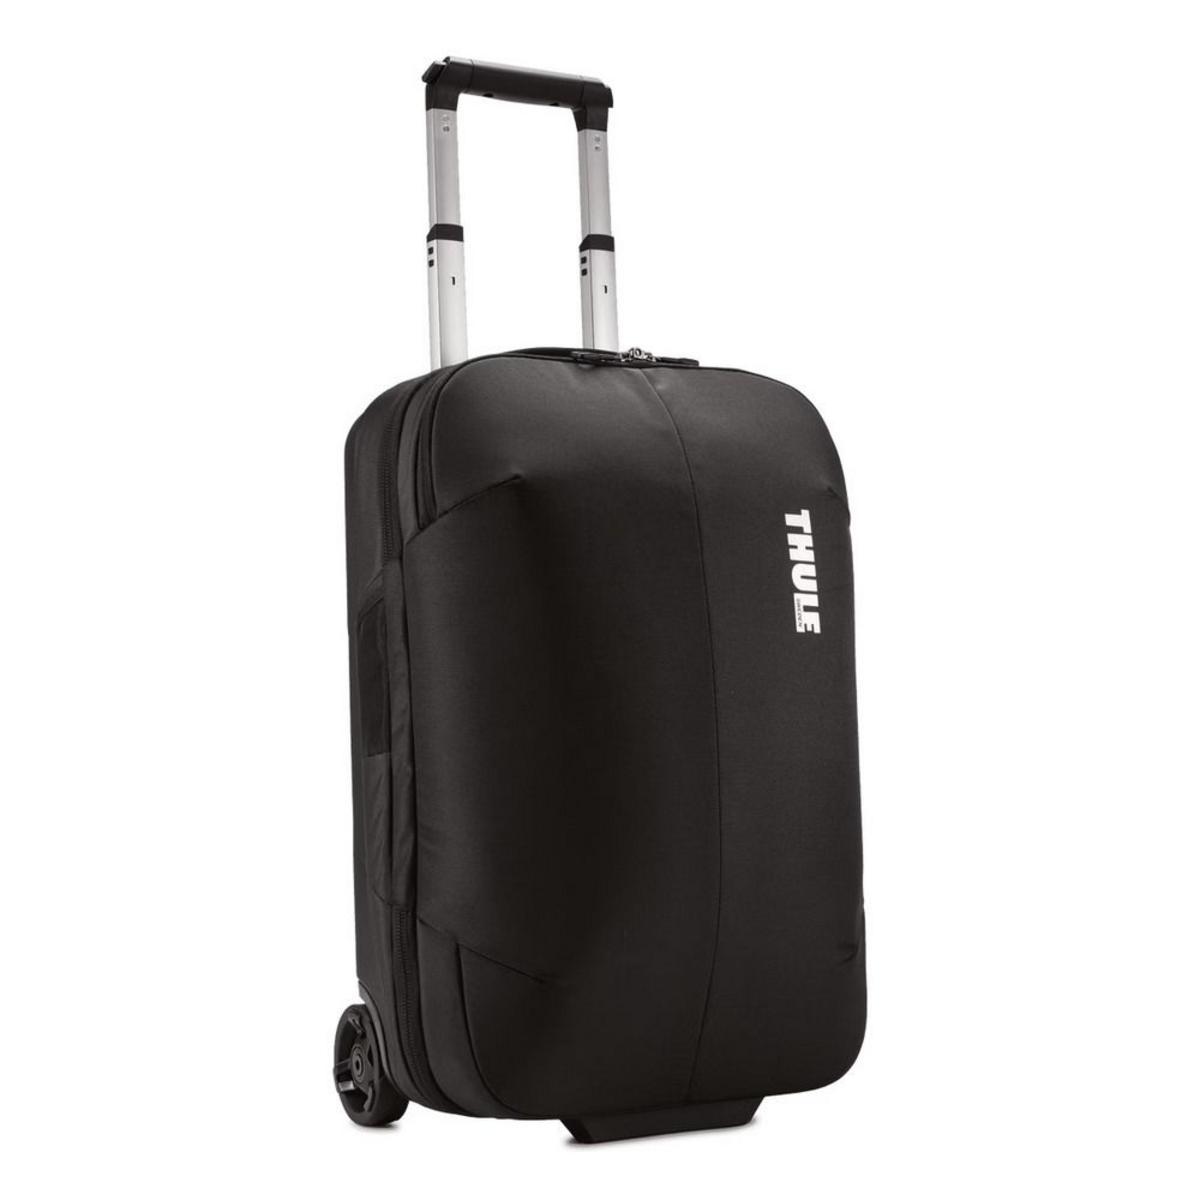 Thule Subterra Carry On 36L Luggage Bag - Black